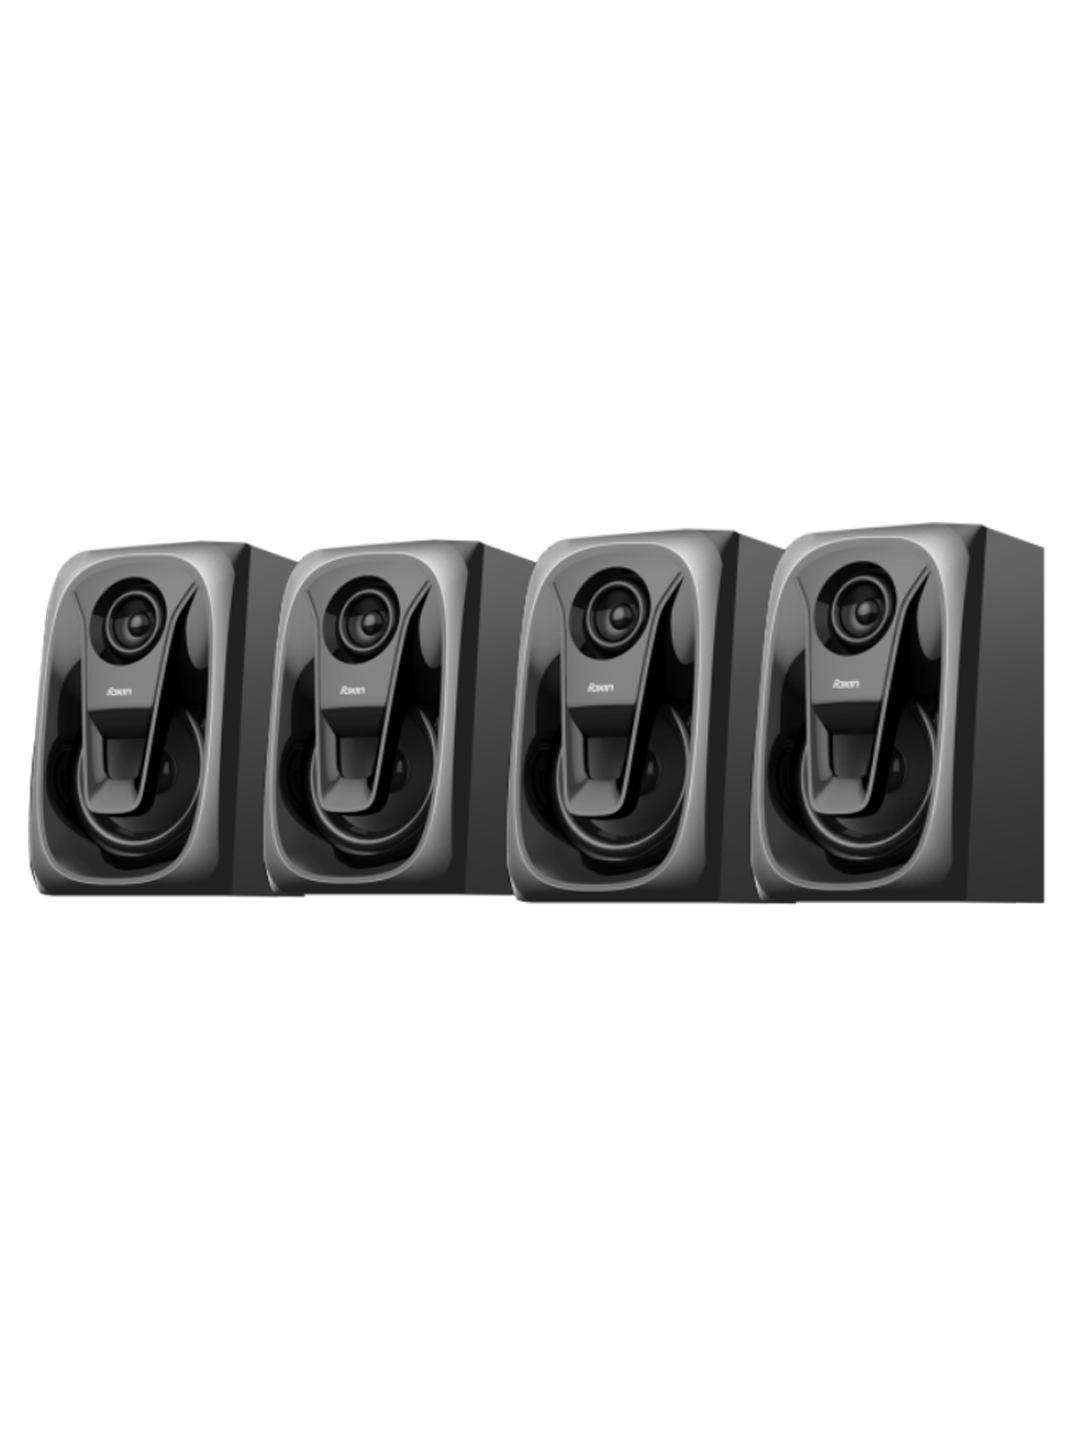 Foxin FMS-5400 4.1 Channel Multimedia Speakers 90 Watt/Foxin home theater/ music system for home/party speakers